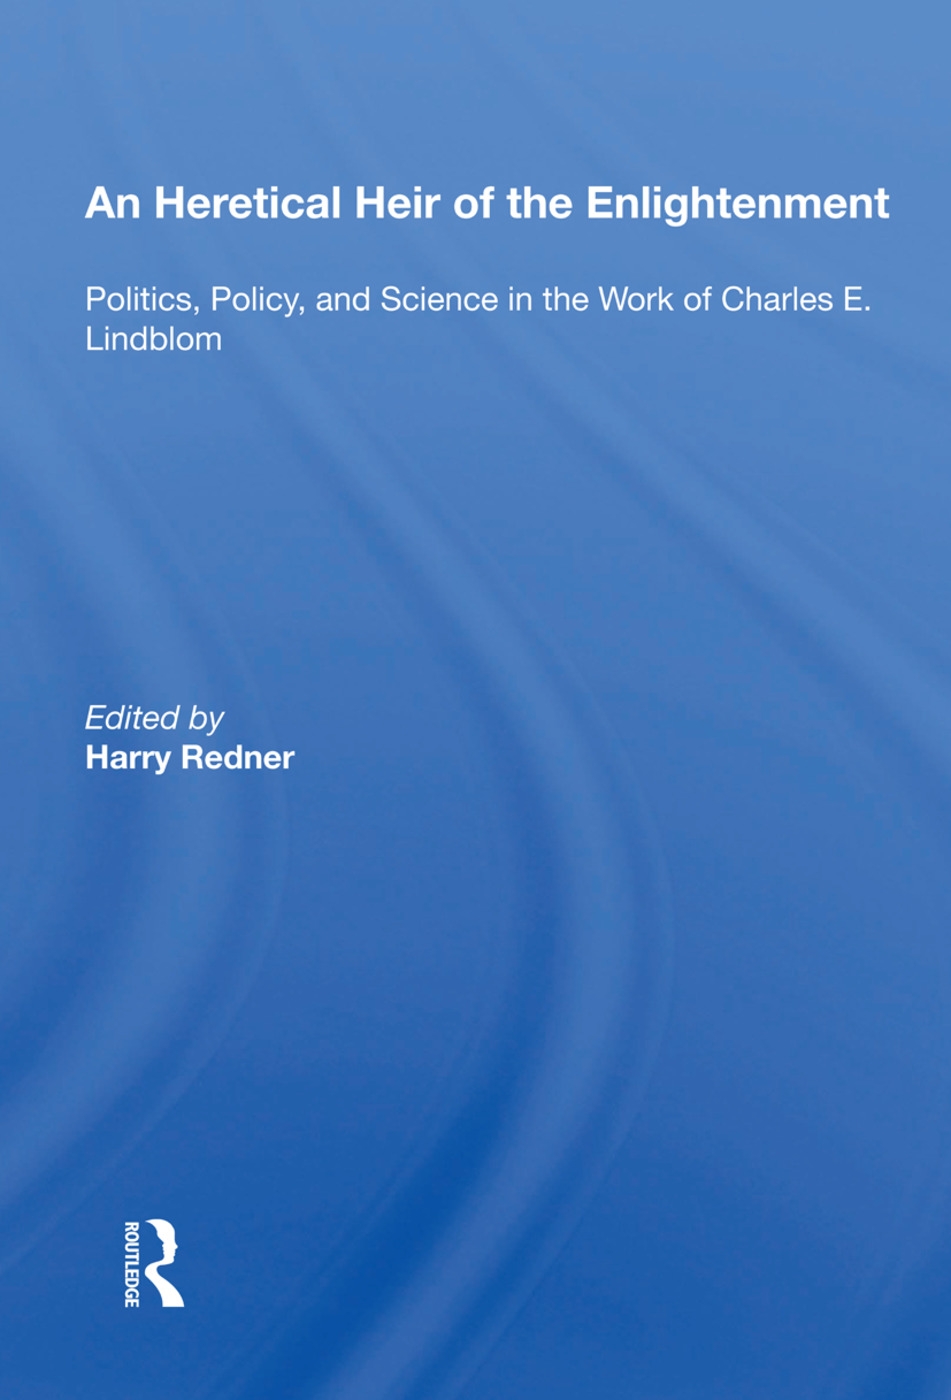 An an Heretical Heir of the Enlightenment: Politics, Policy and Science in the Work of Charles E. Lindblom